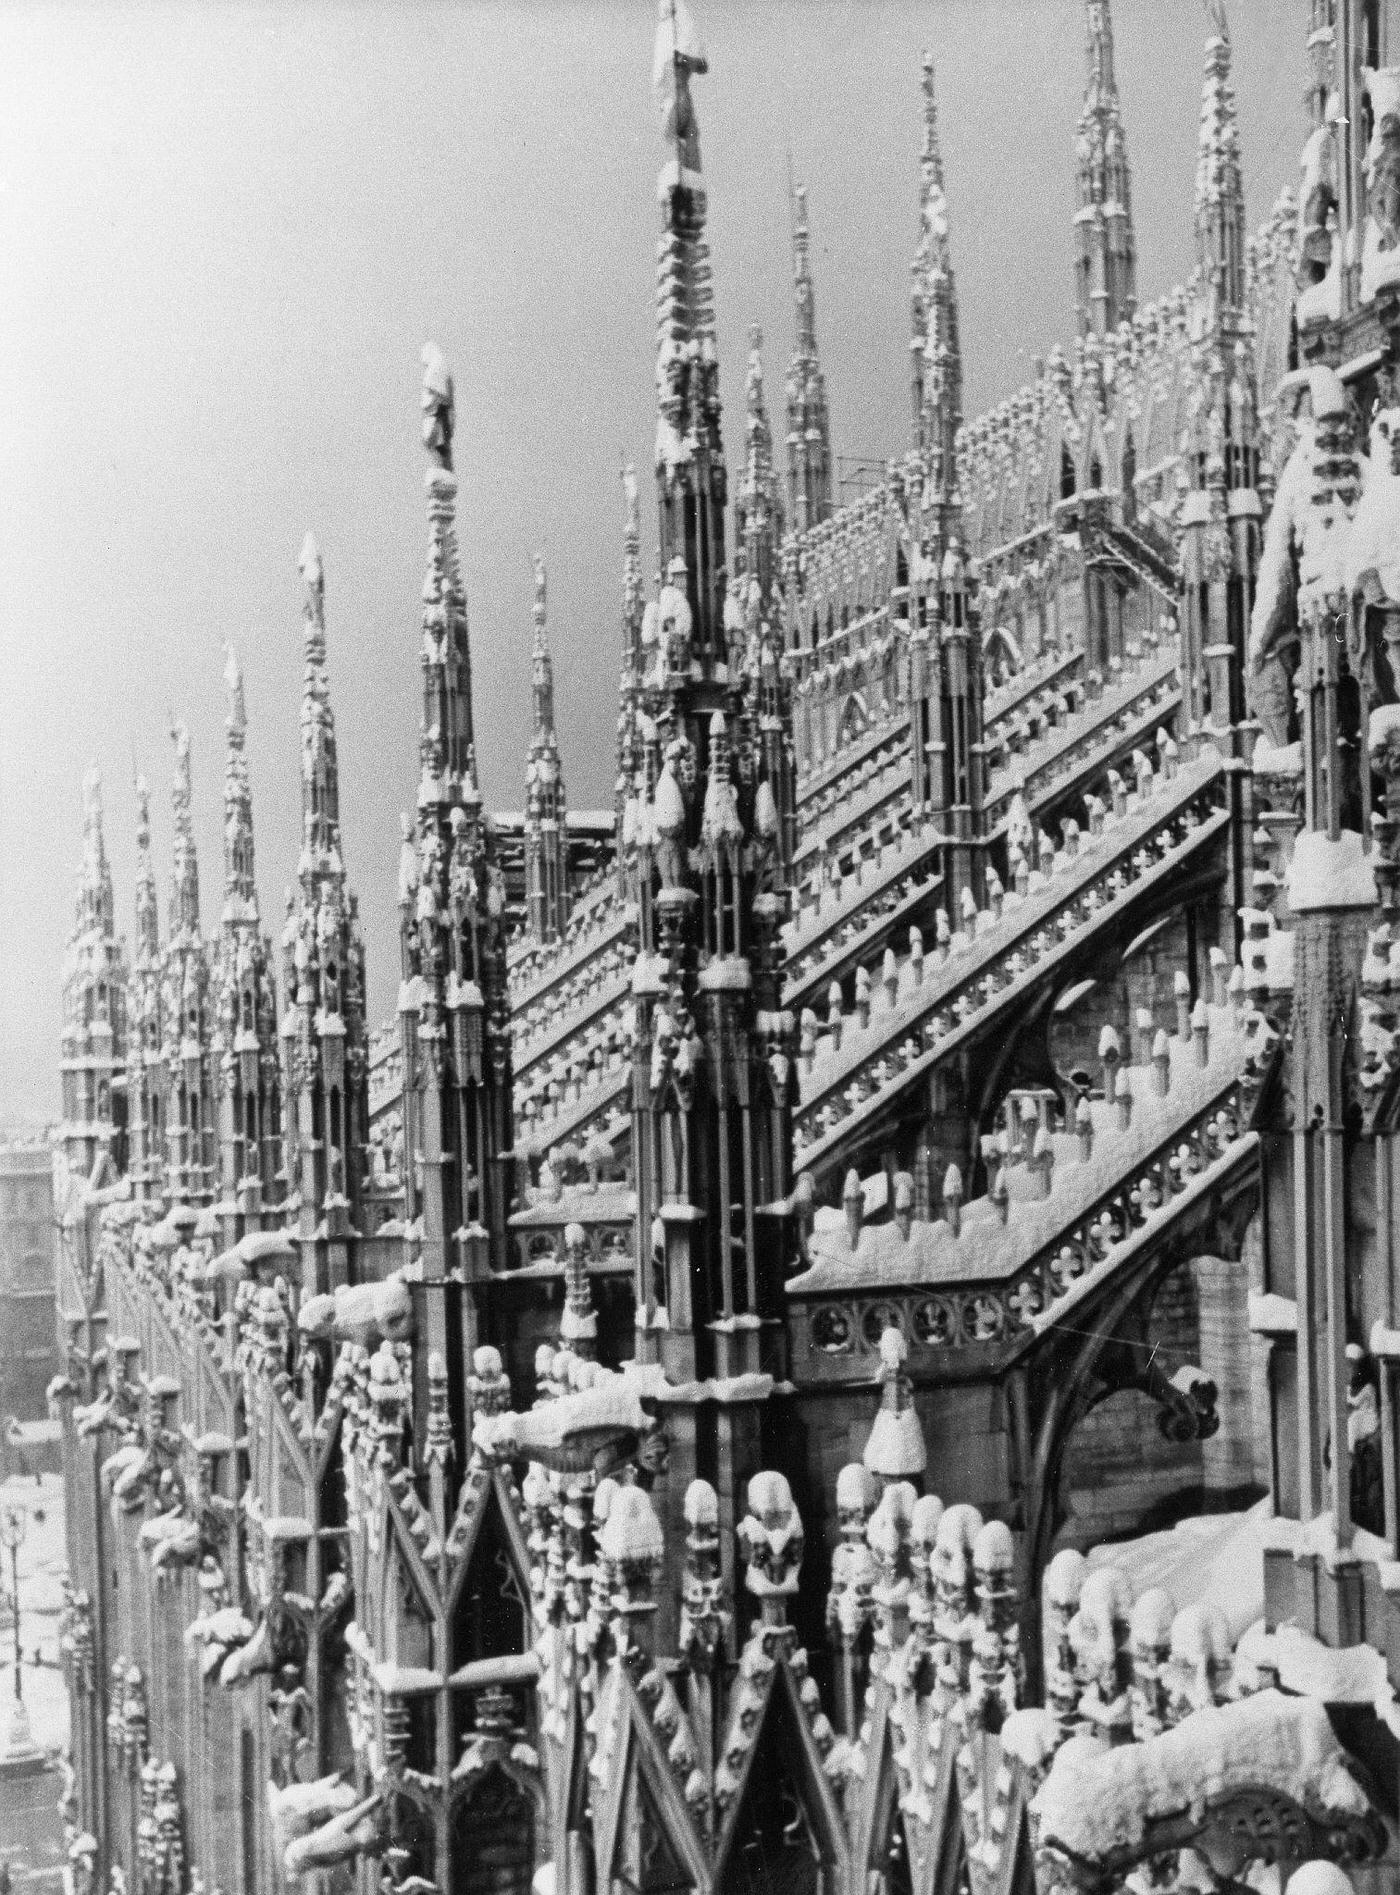 Pinnacles and flying buttresses of Milan Cathedral in the winter in Italy, 1934